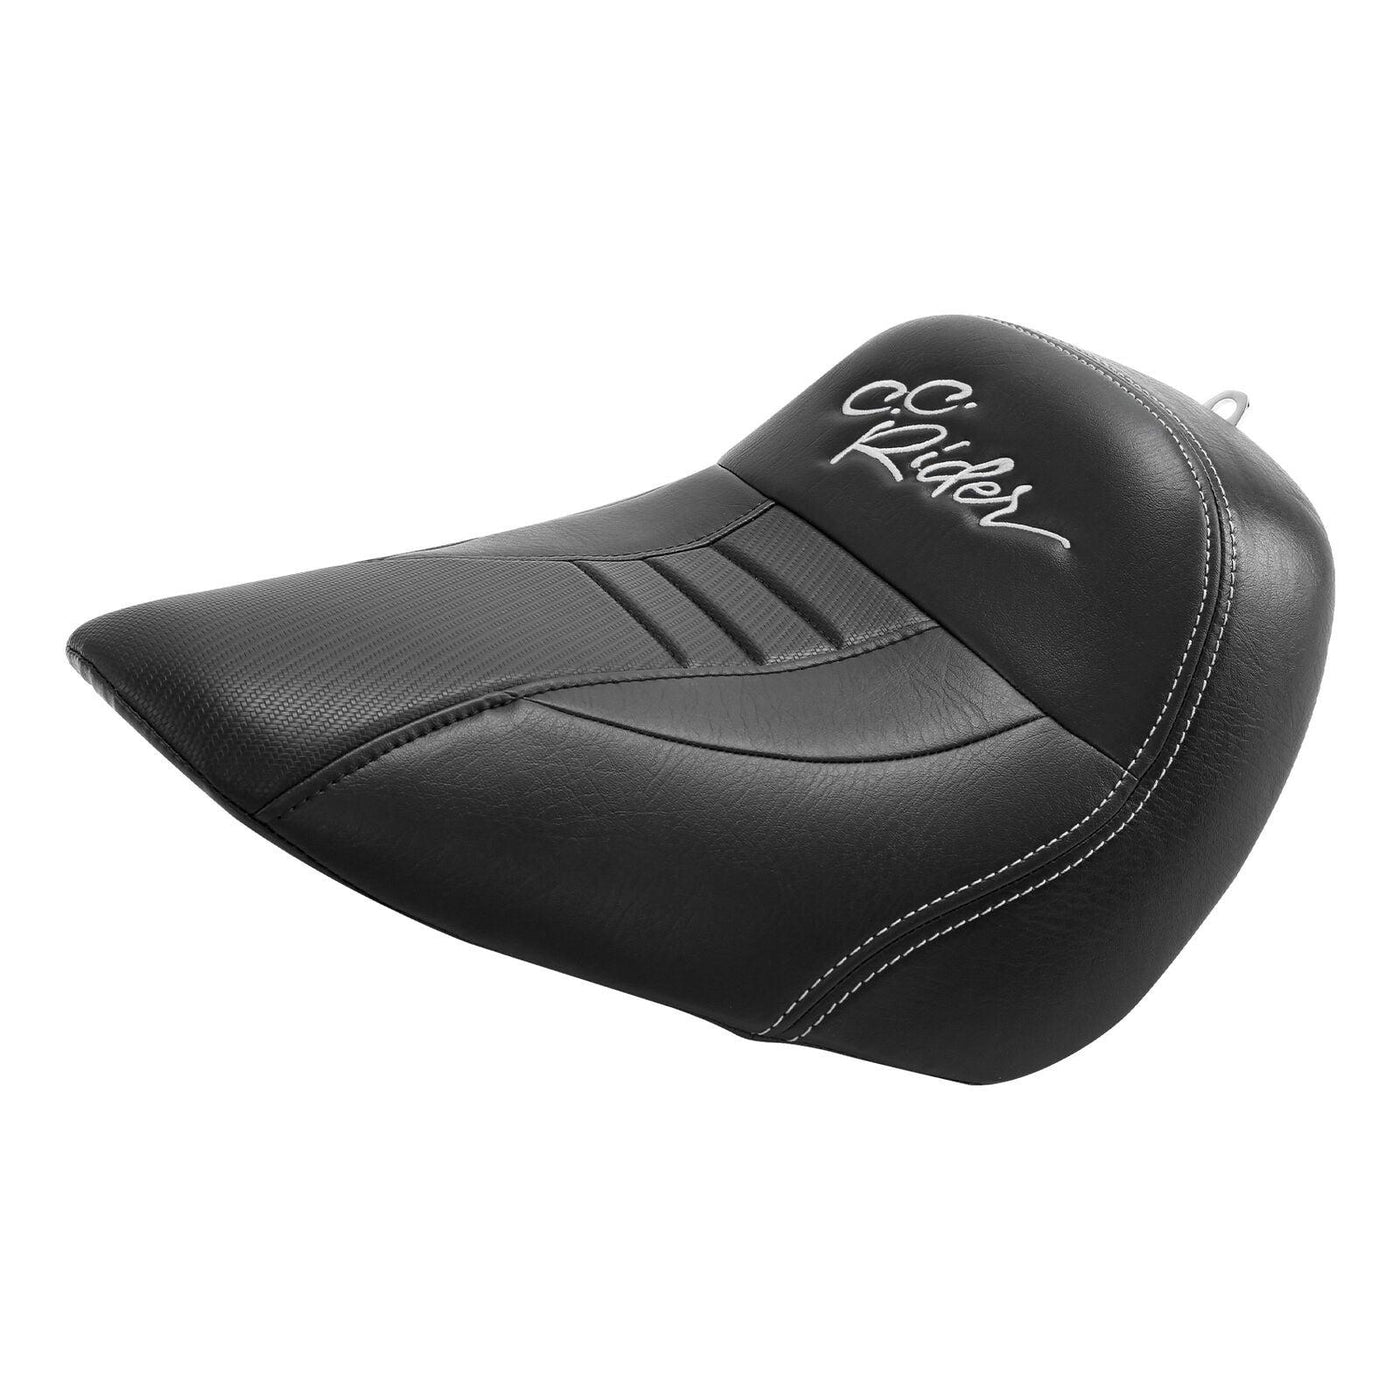 Driver Passenger Seat Fit For Harley Softail Street Bob FXBB Softail 2018-2021 - Moto Life Products